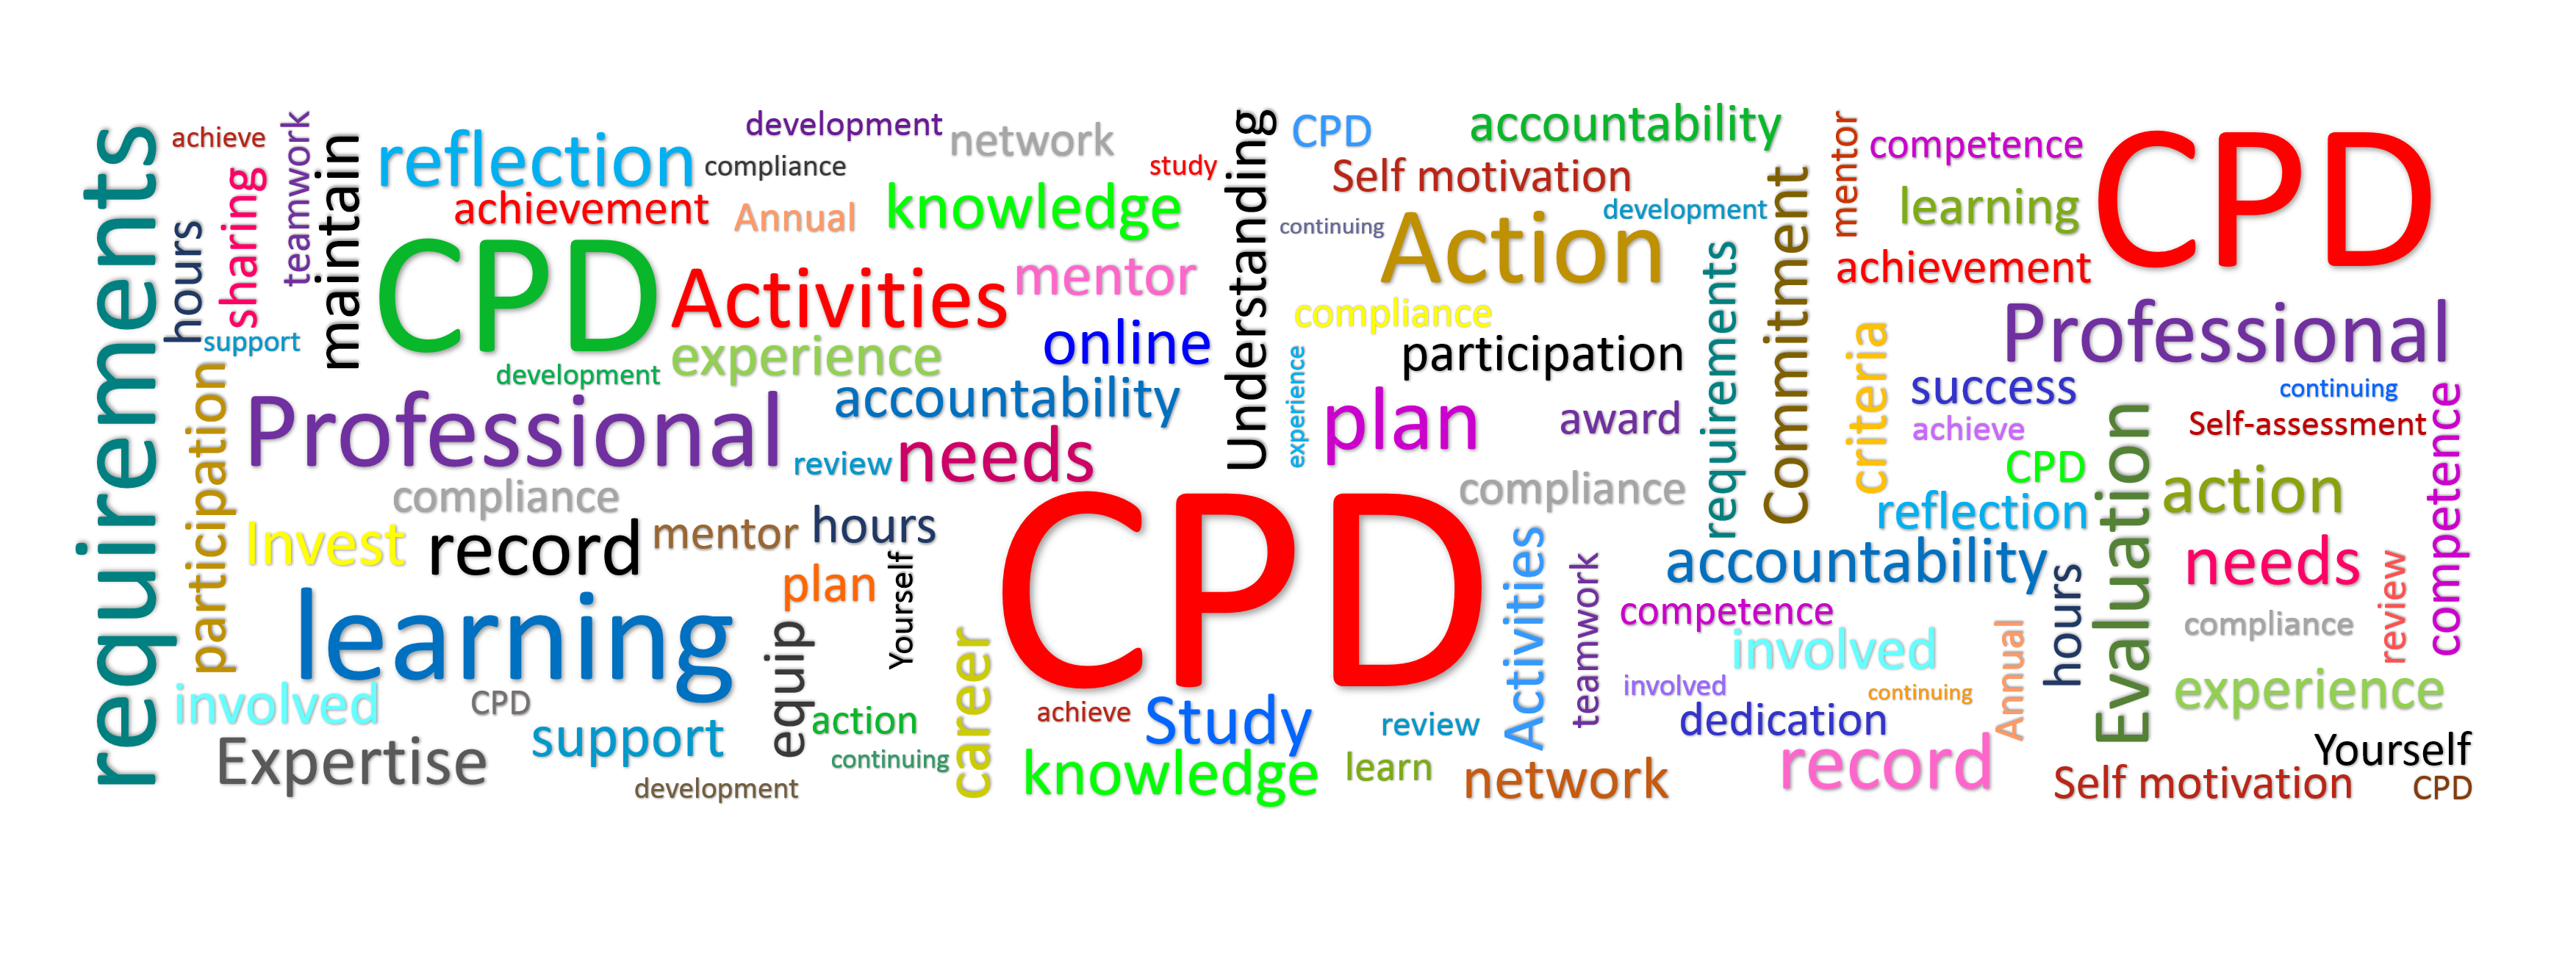 word cloud of words related to continuous professional development, including knowledge, evaulation, action and self-motivation